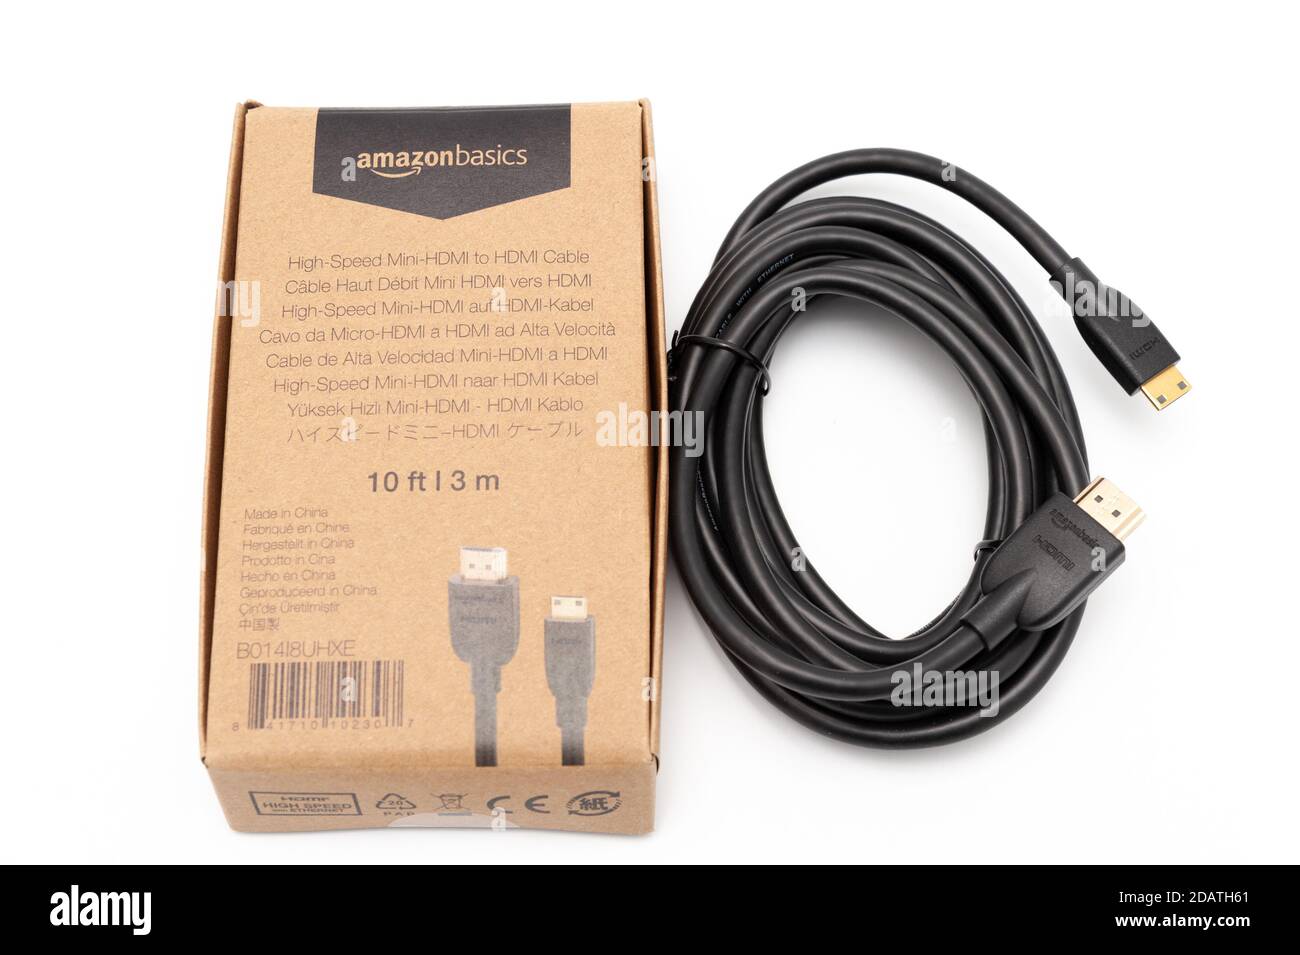 Amazon Basic HDMI Cable 3.0m (Type A Male to Mini Type C Male) High Speed  next to the small cardboard box with the amazonbasics logo Stock Photo -  Alamy